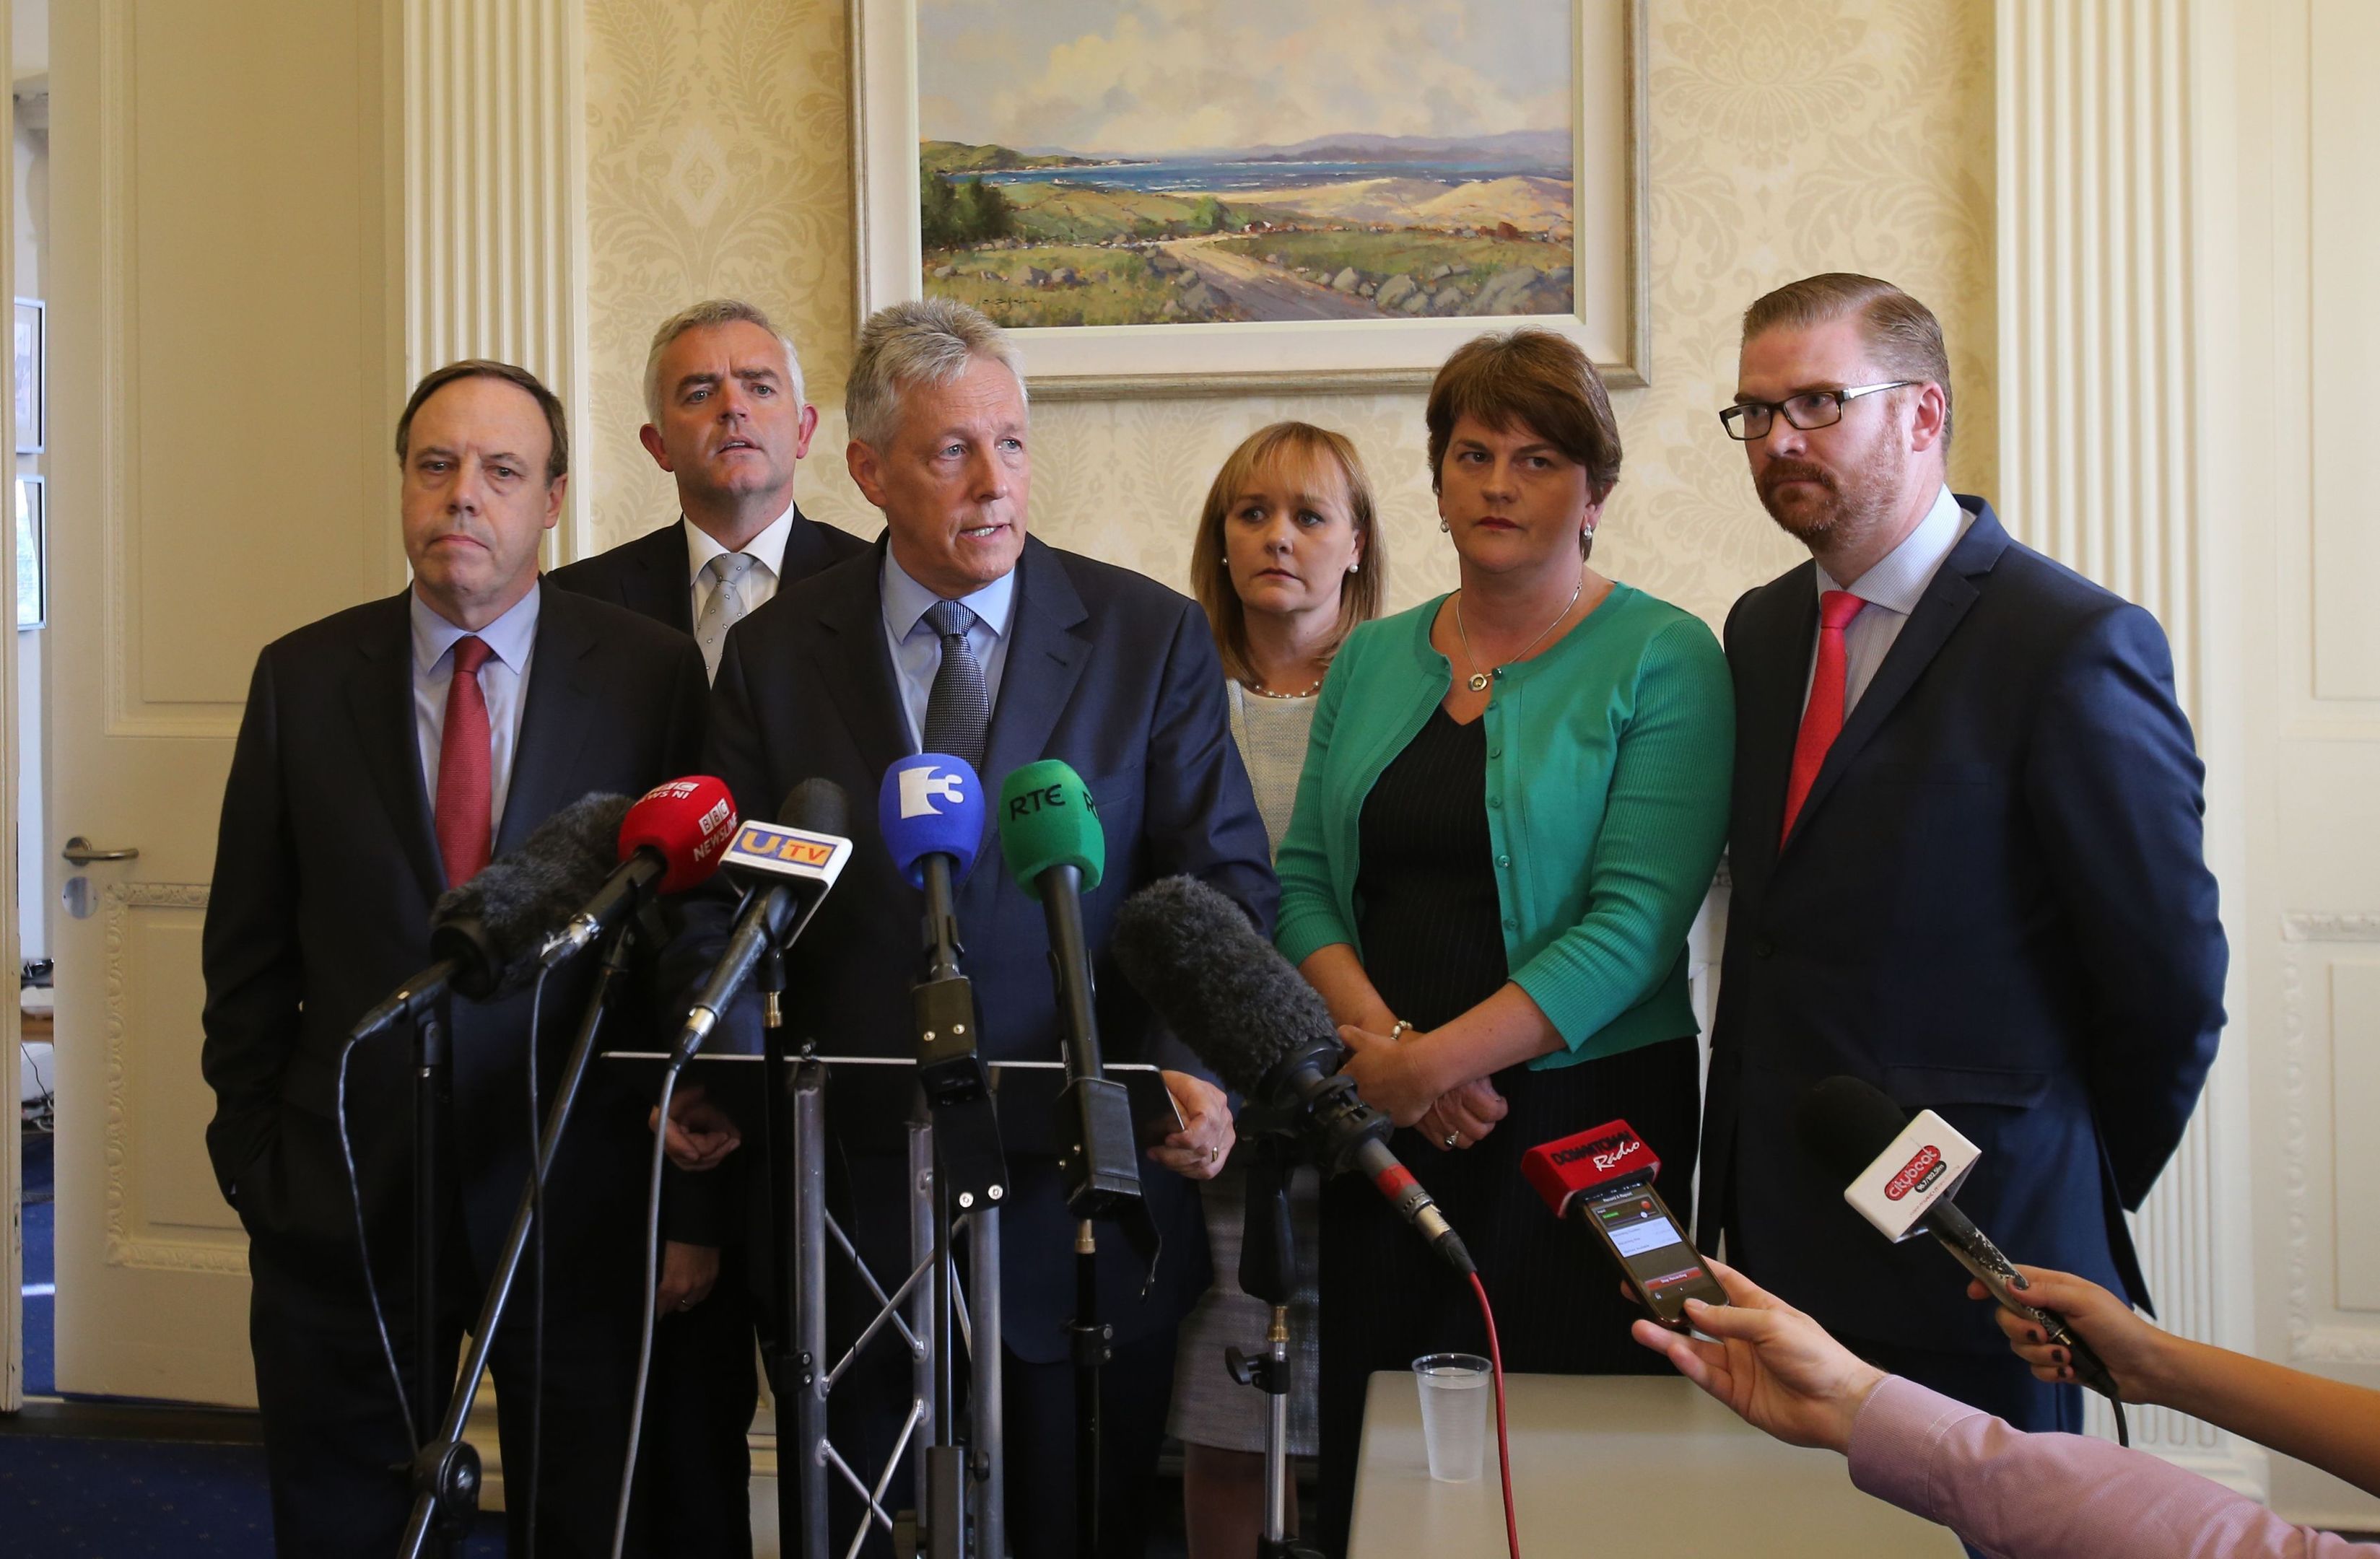 First Minister Peter Robinson at Stormont, Belfast, watched by Nigel Dodds, Johnathan Bell, Michelle Mcilveen, Arlene Foster and Simon Hamilton,  announces that he is standing aside, and the majority of his Democratic Unionist ministers are to resign, with party colleague Arlene Foster to take over as acting First Minister. PRESS ASSOCIATION Photo. Picture date: Thursday September 10, 2015. The surprise move from the DUP leader comes amid an Assembly crisis in the wake of a murder linked to the IRA murder. See PA story ULSTER Politics. Photo credit should read: Niall Carson/PA Wire